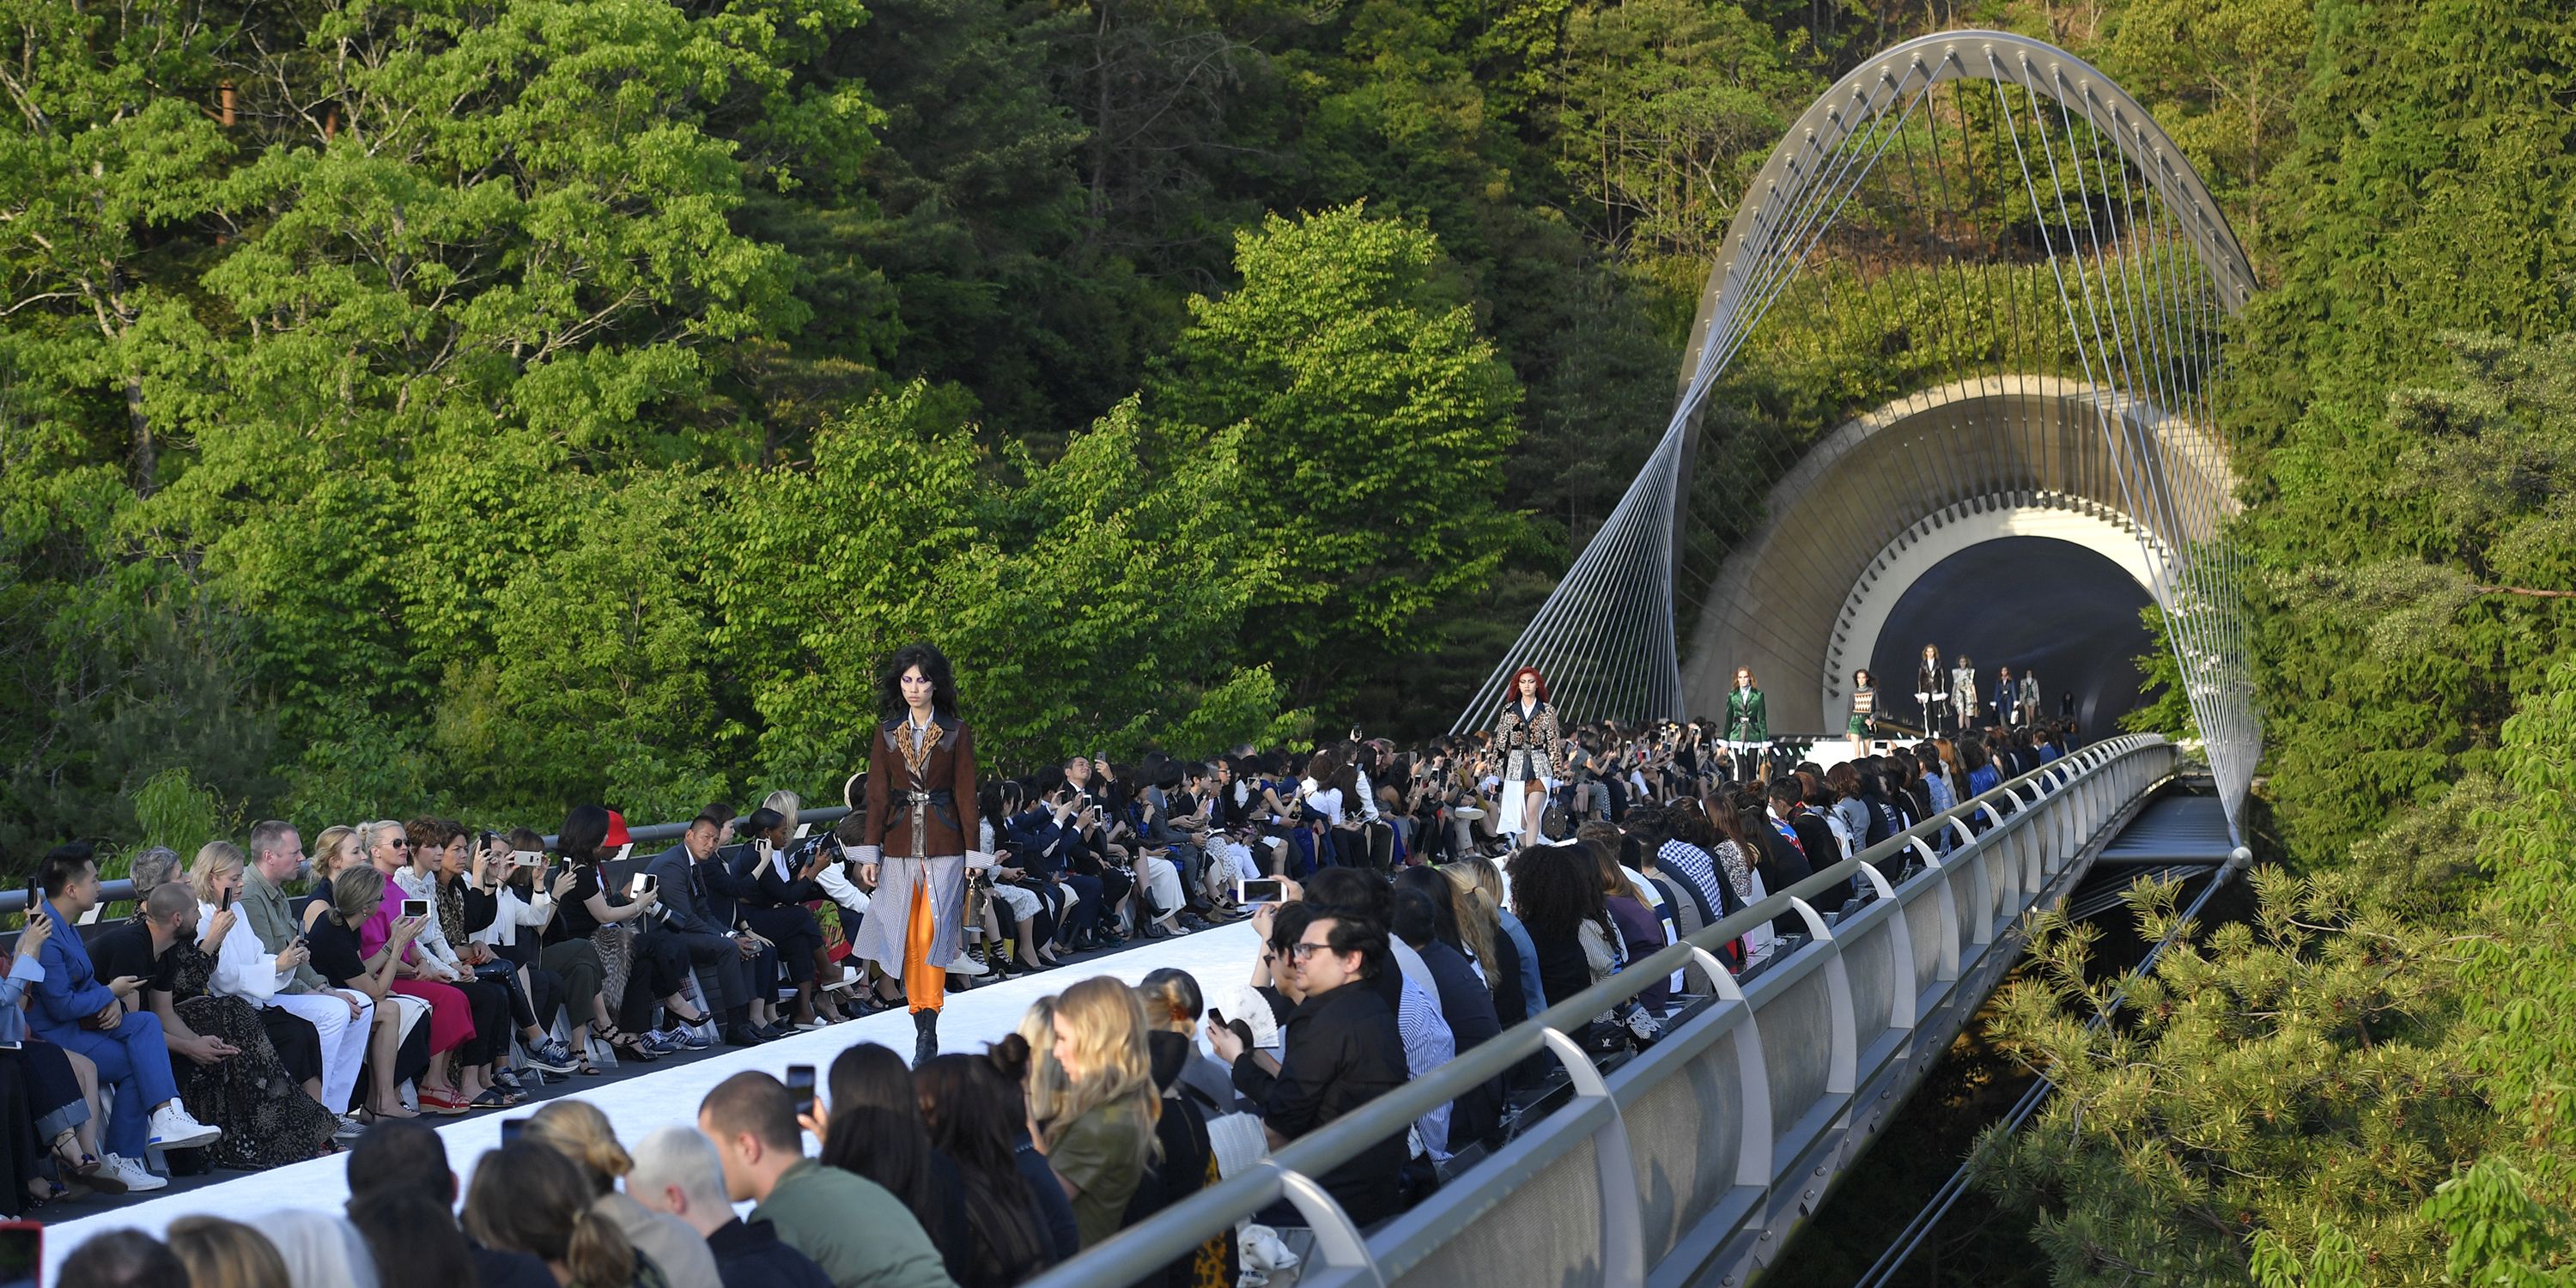 Louis Vuitton creates a striking moment on Jamsugyo bridge with its first  Prefall show - LVMH